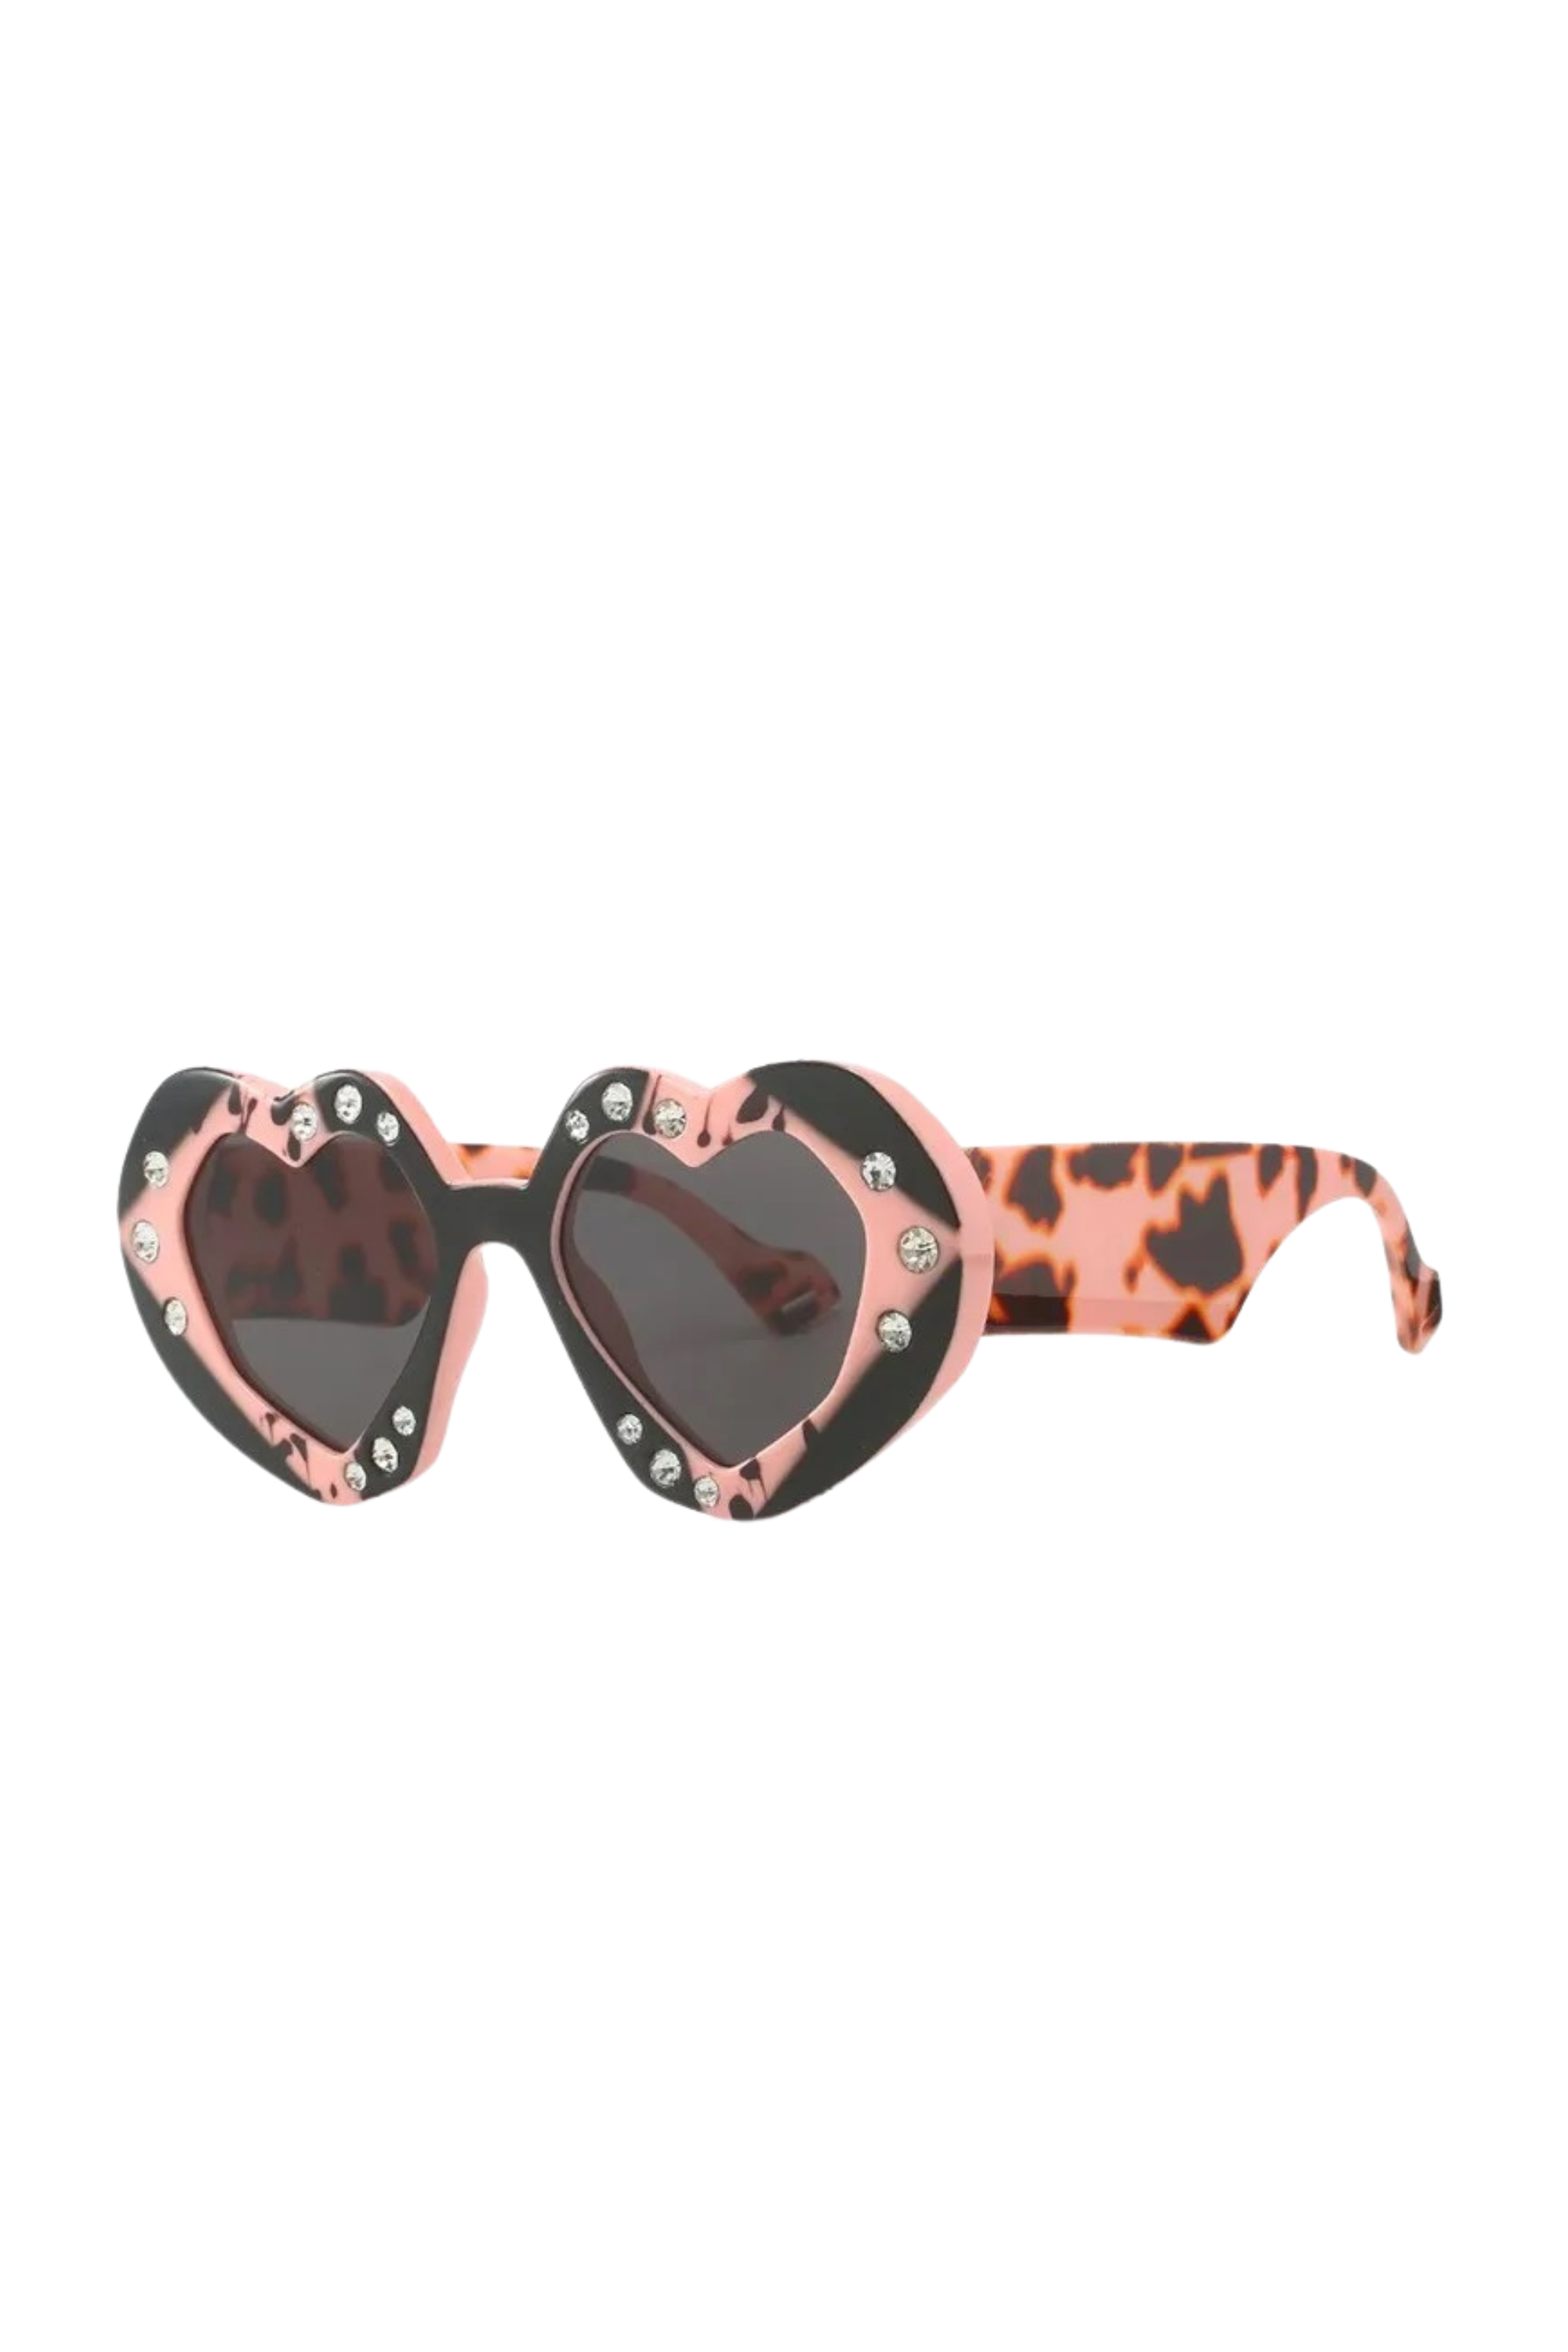 GOLDxTEAL pink and black sunglasses.